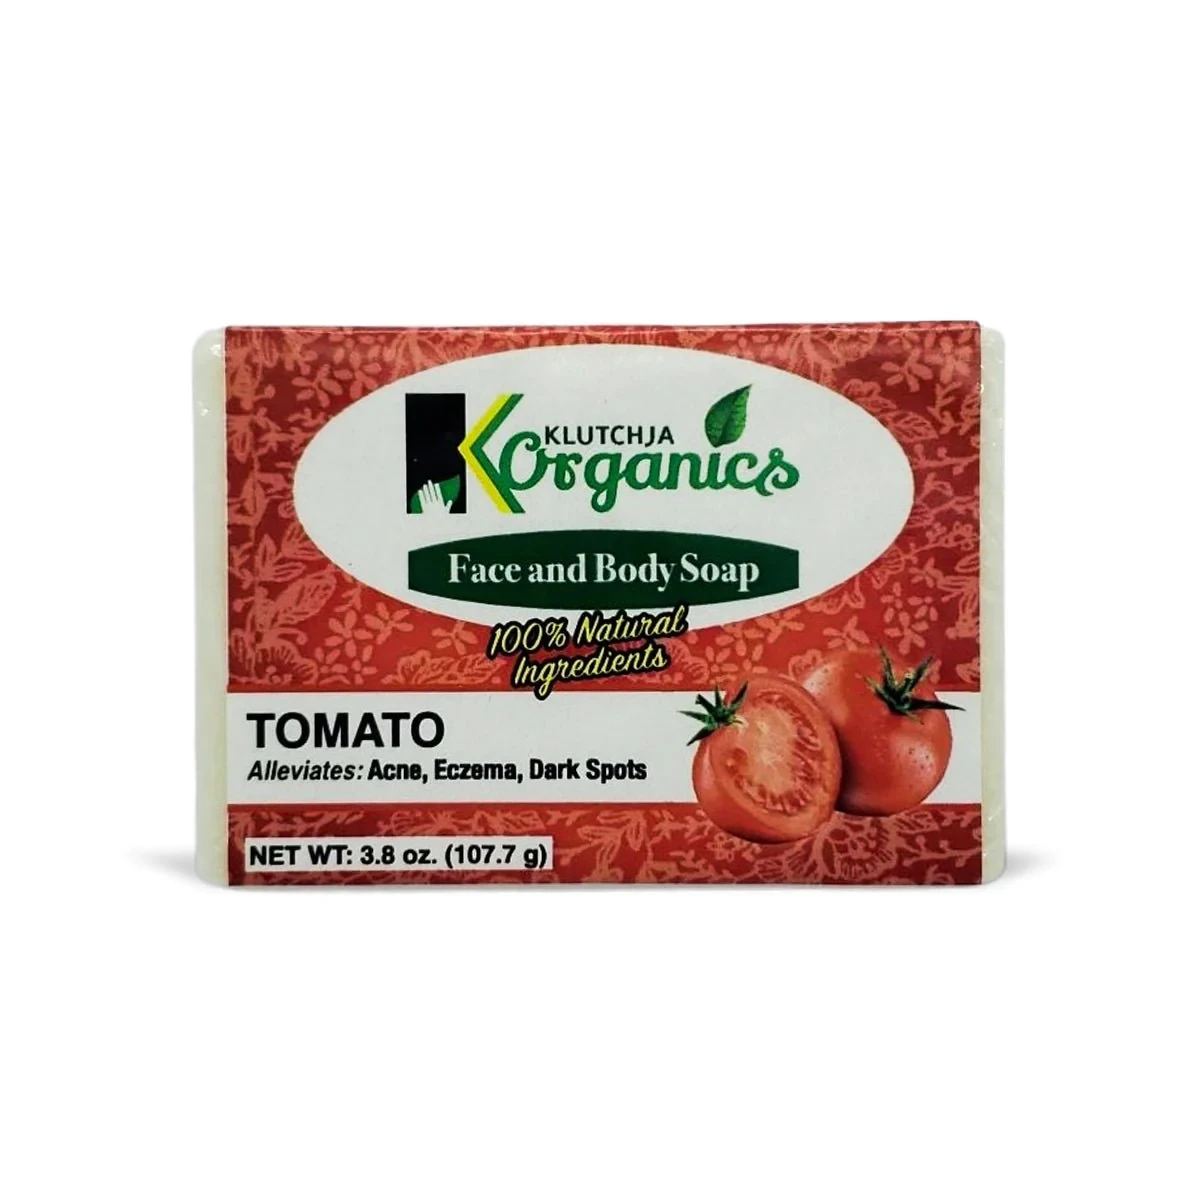 Klutchja Organices Tomato Face And Body Soap